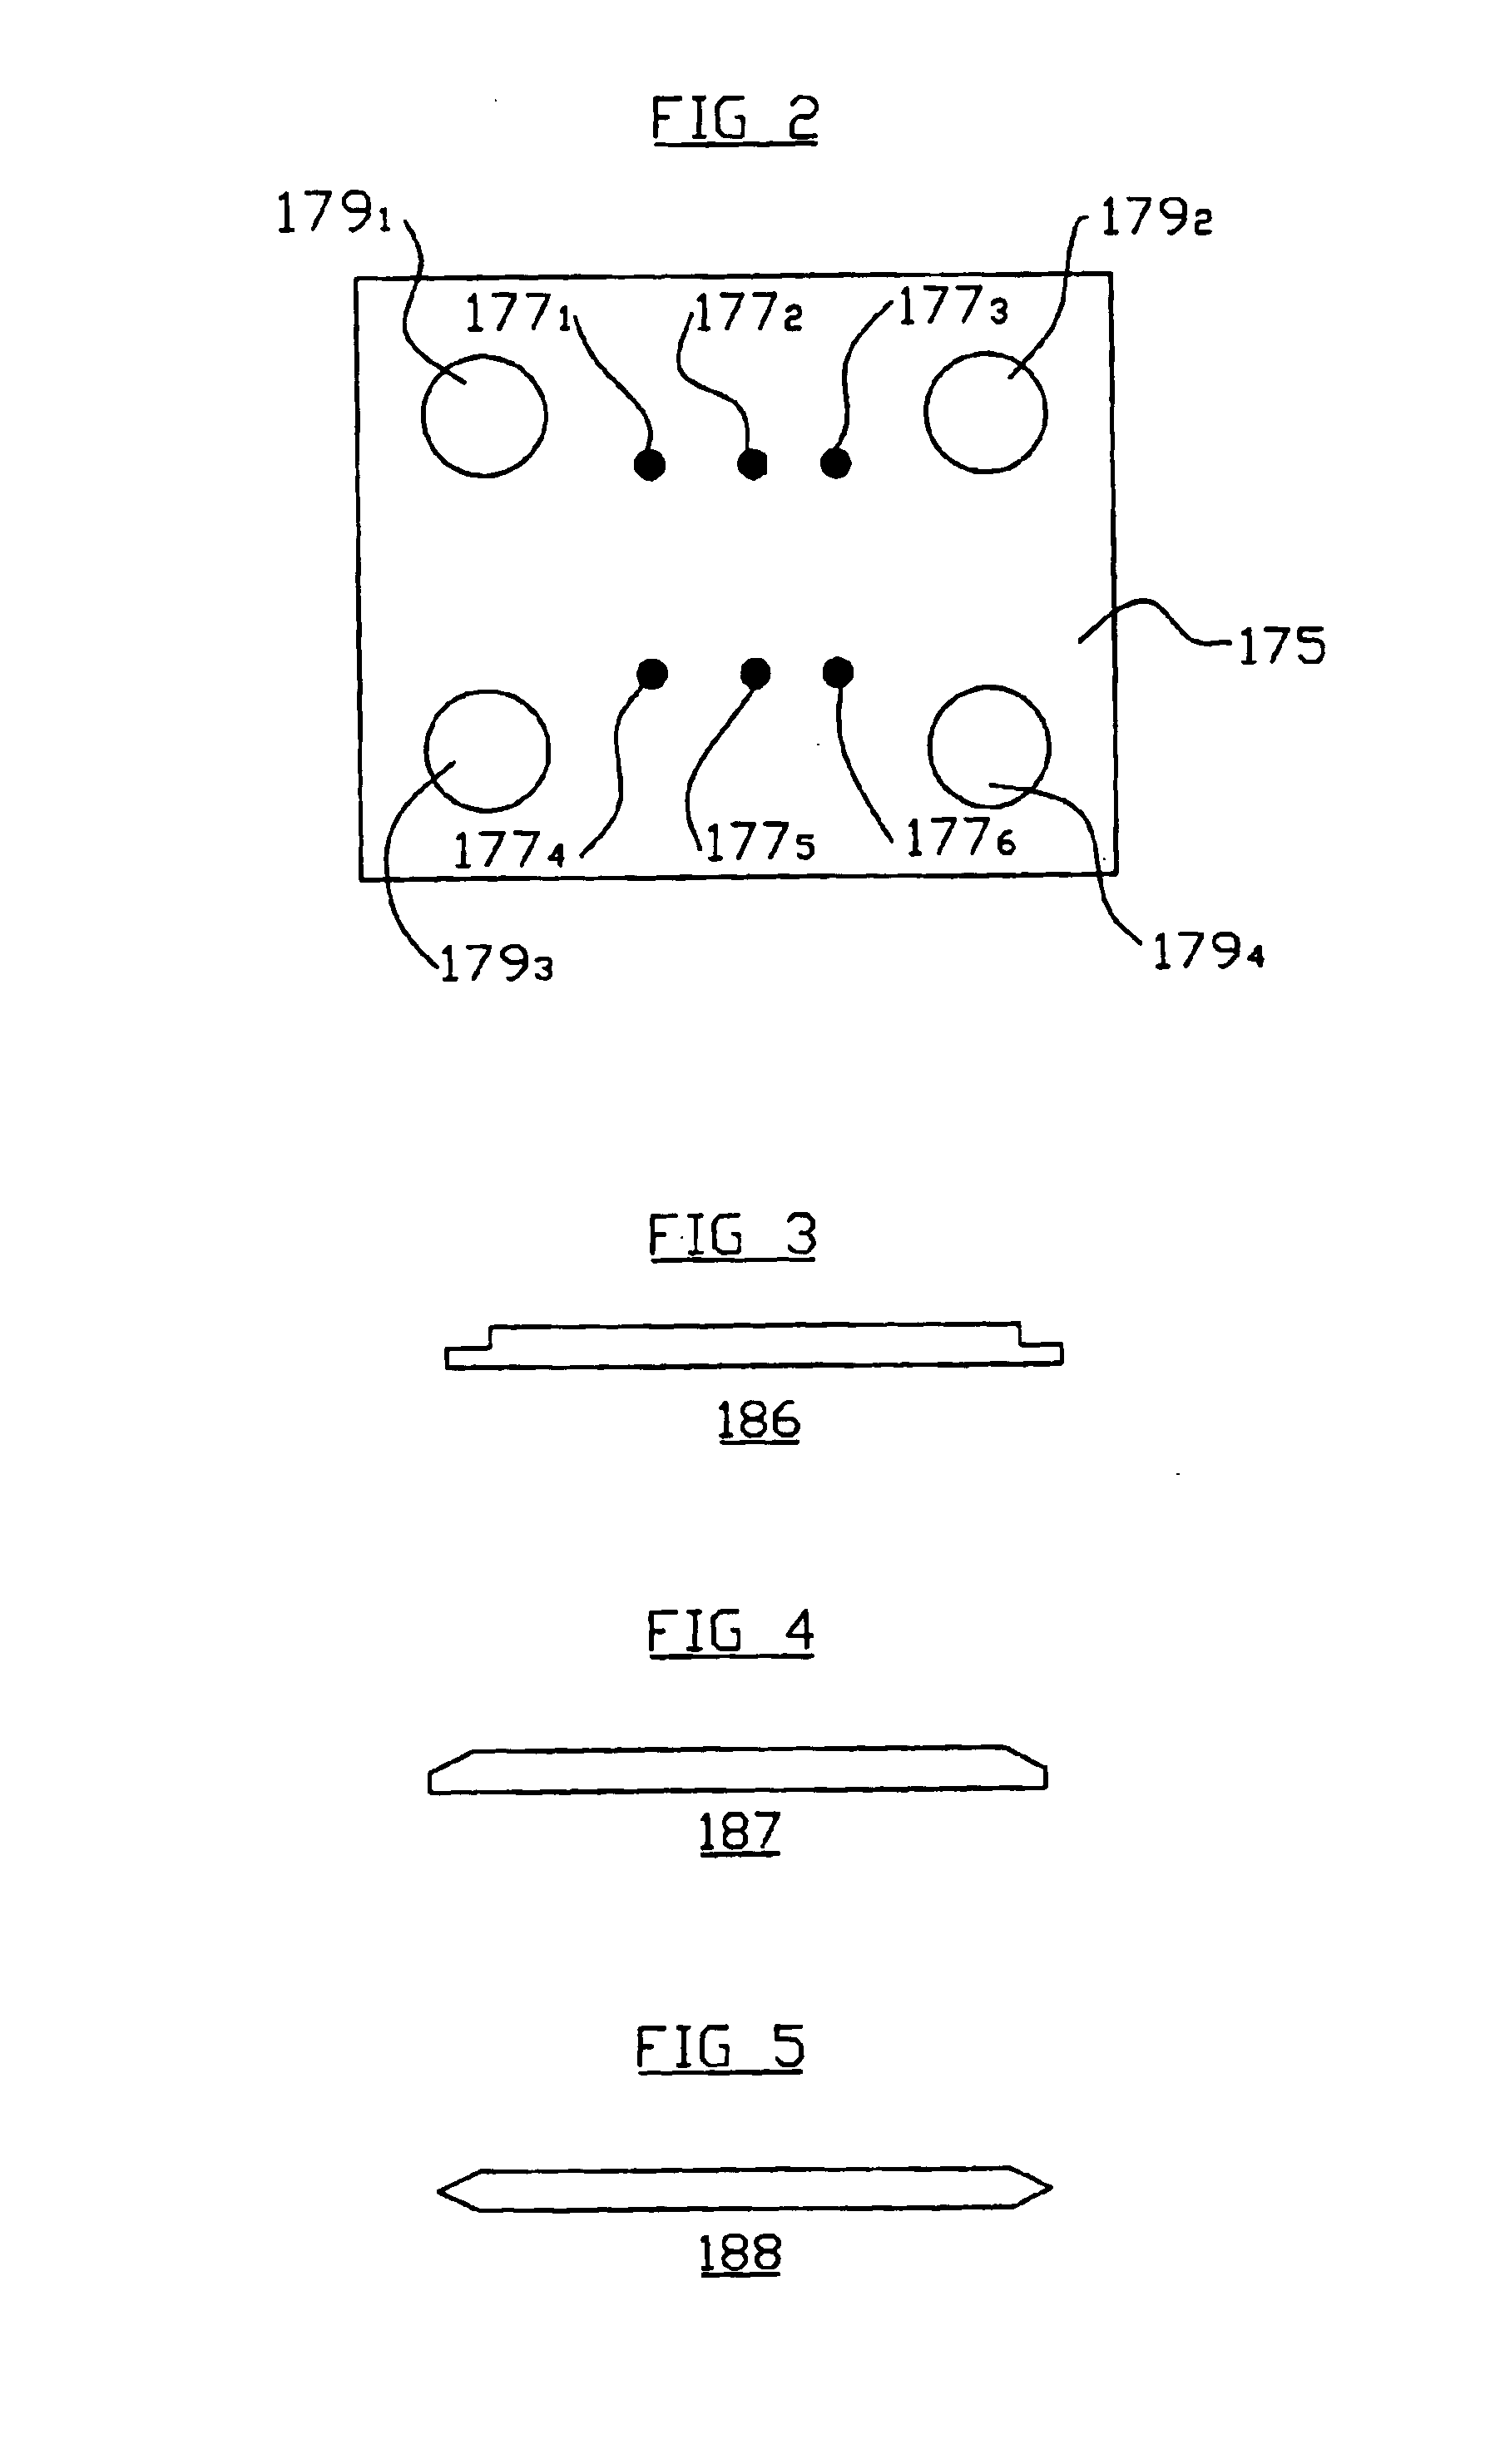 Probe structures using clamped substrates with compliant interconnectors